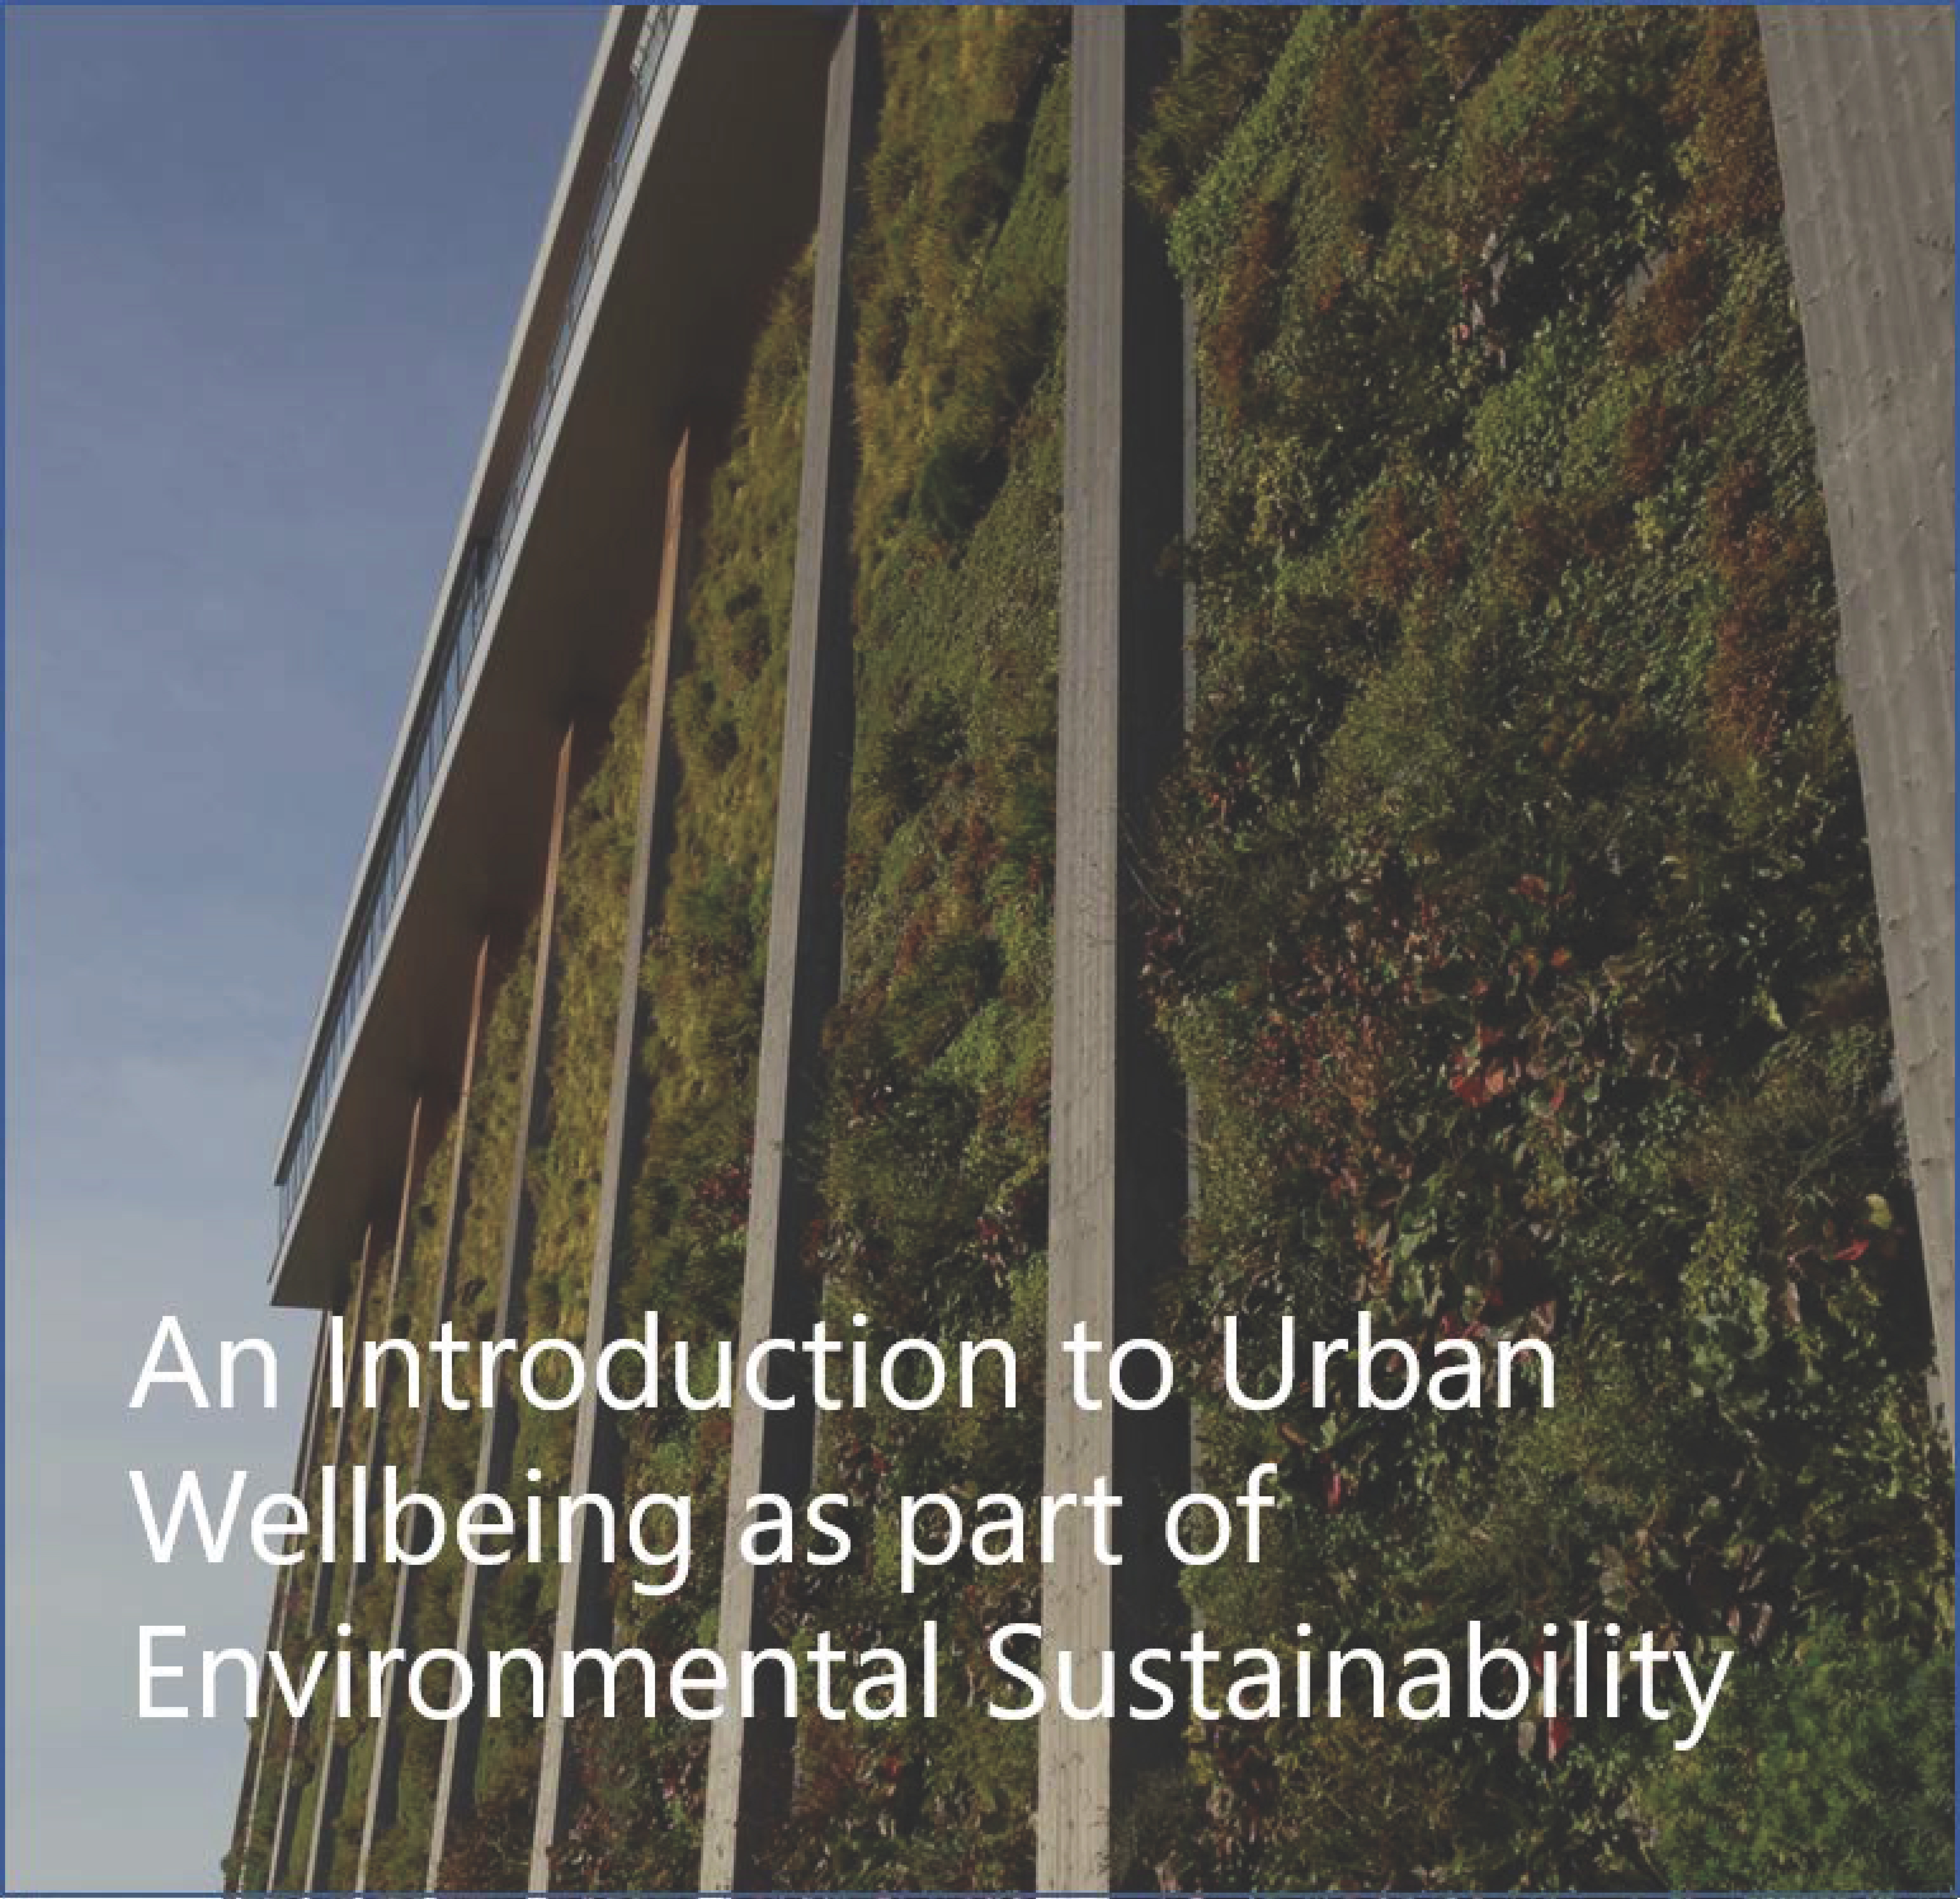 Urban Wellbeing March/April 2021